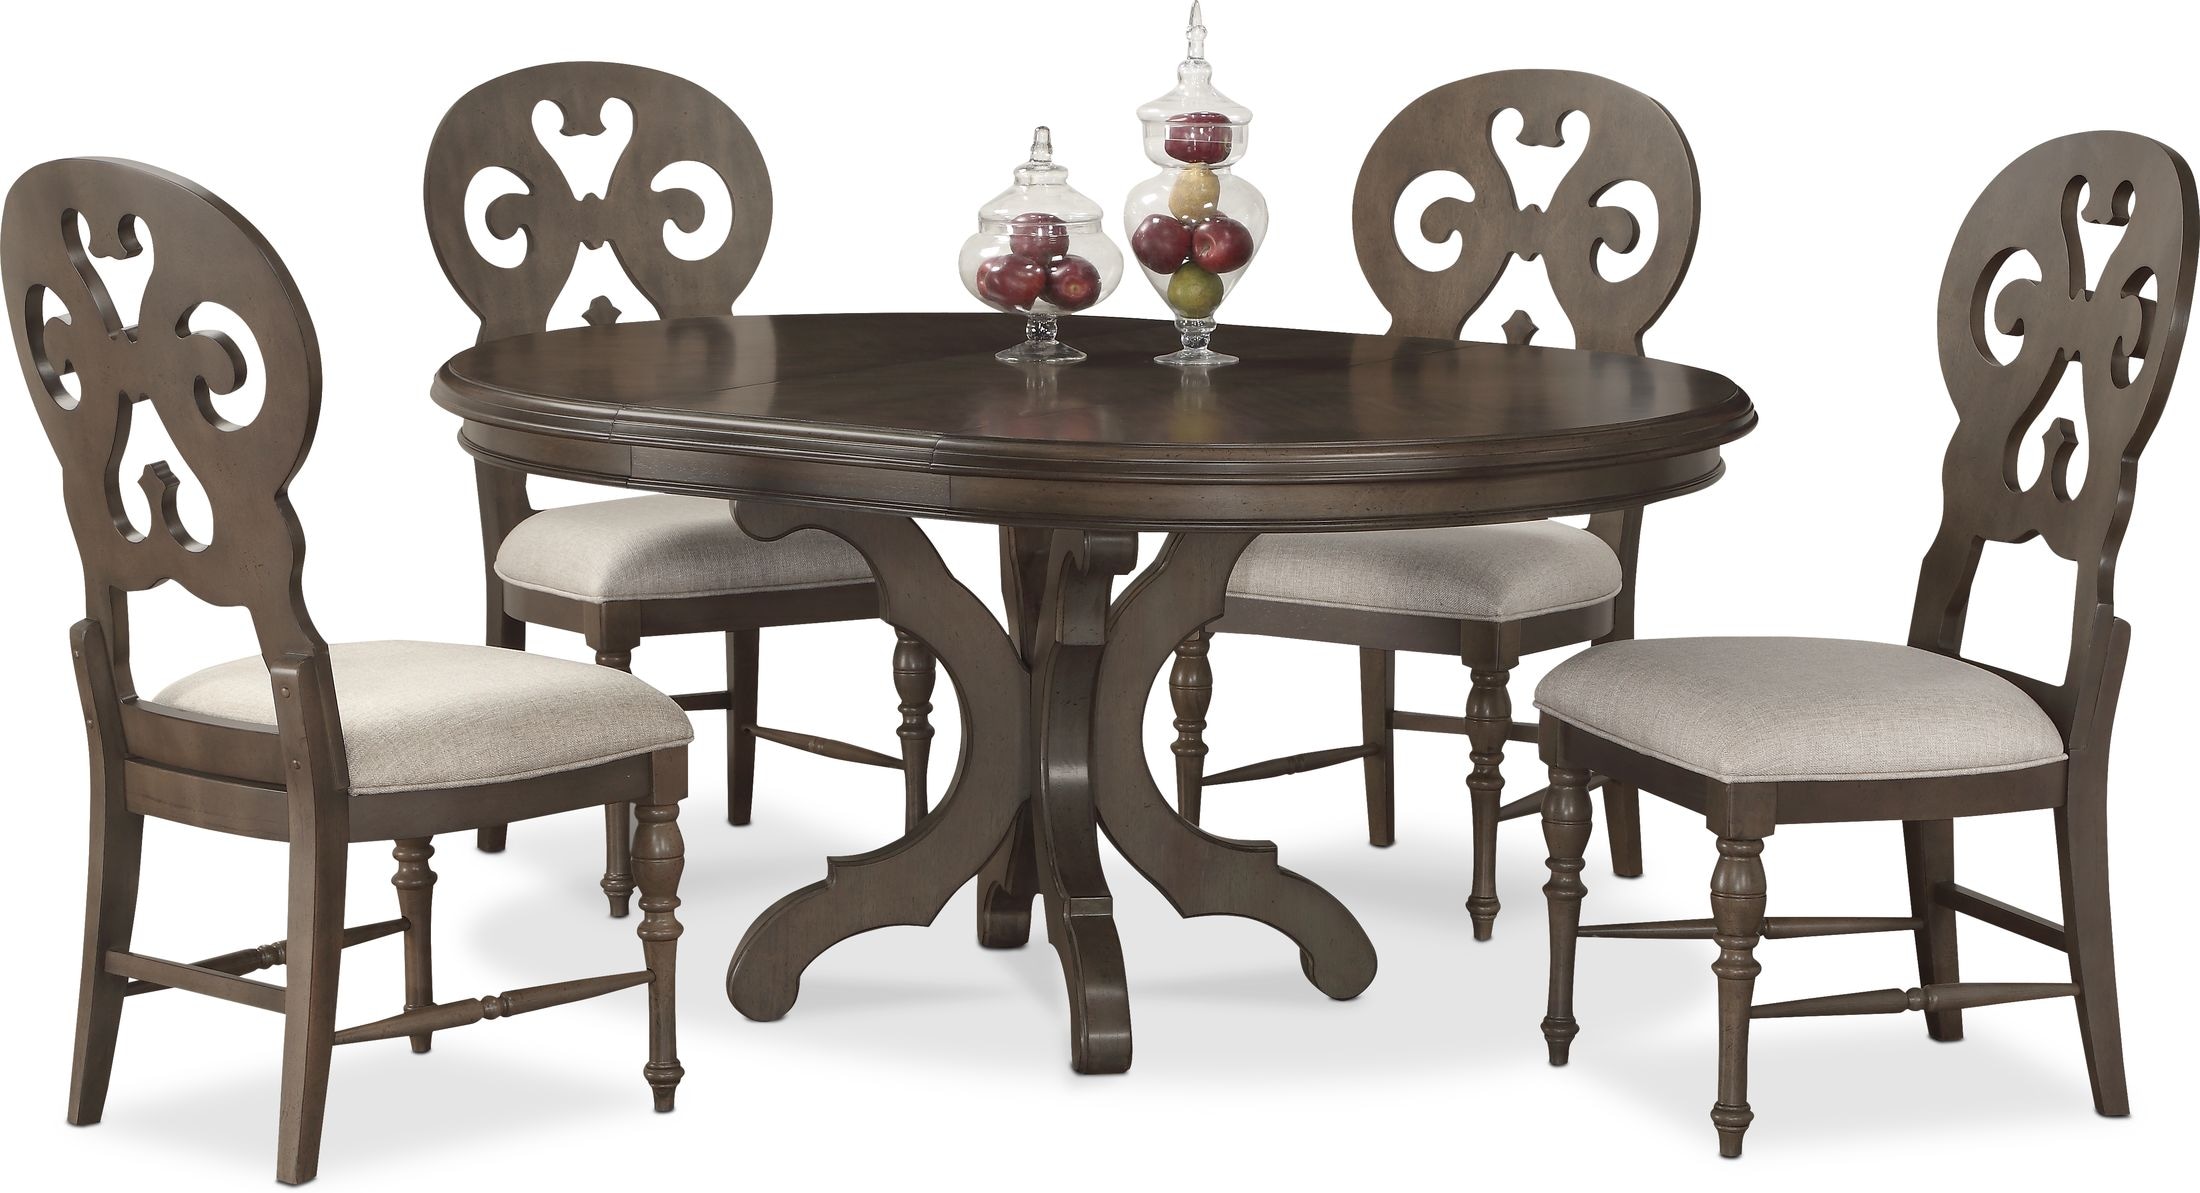 Value City Furniture Dining Chairs, Value City Dining Room Table Chairs